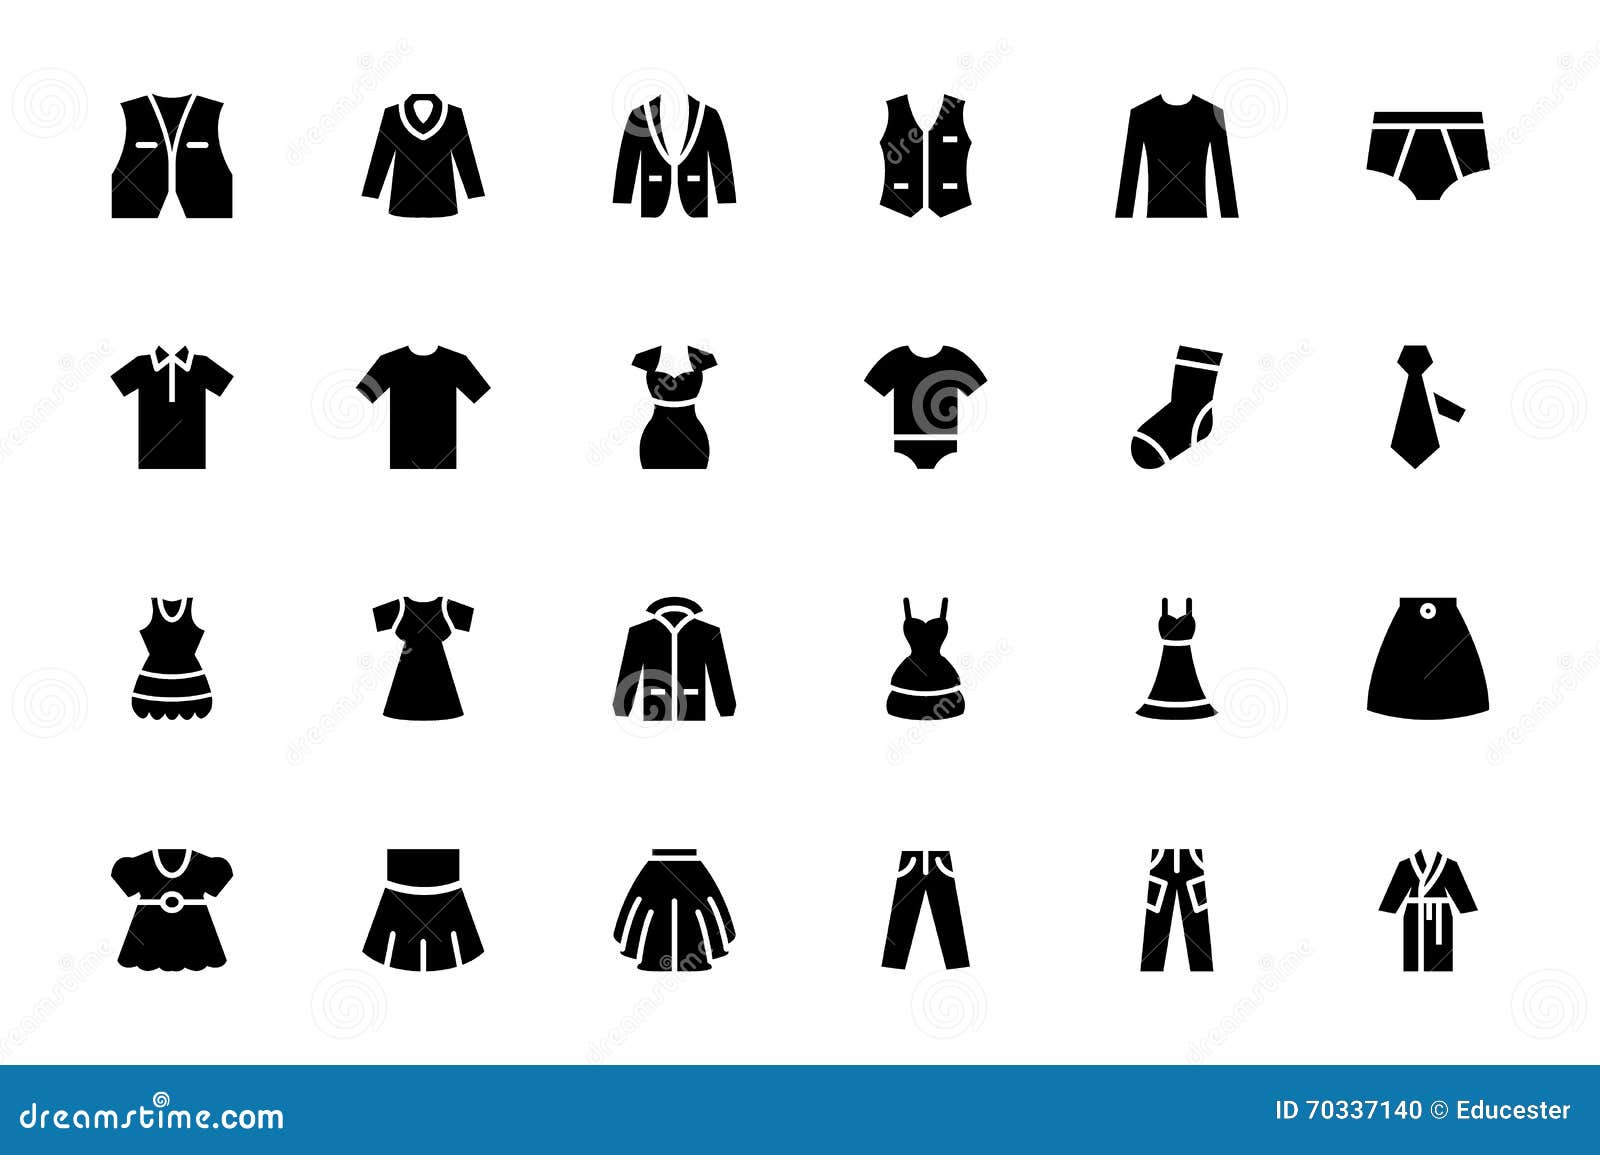 Clothes Vector Icons 2 stock illustration. Illustration of mini - 70337140